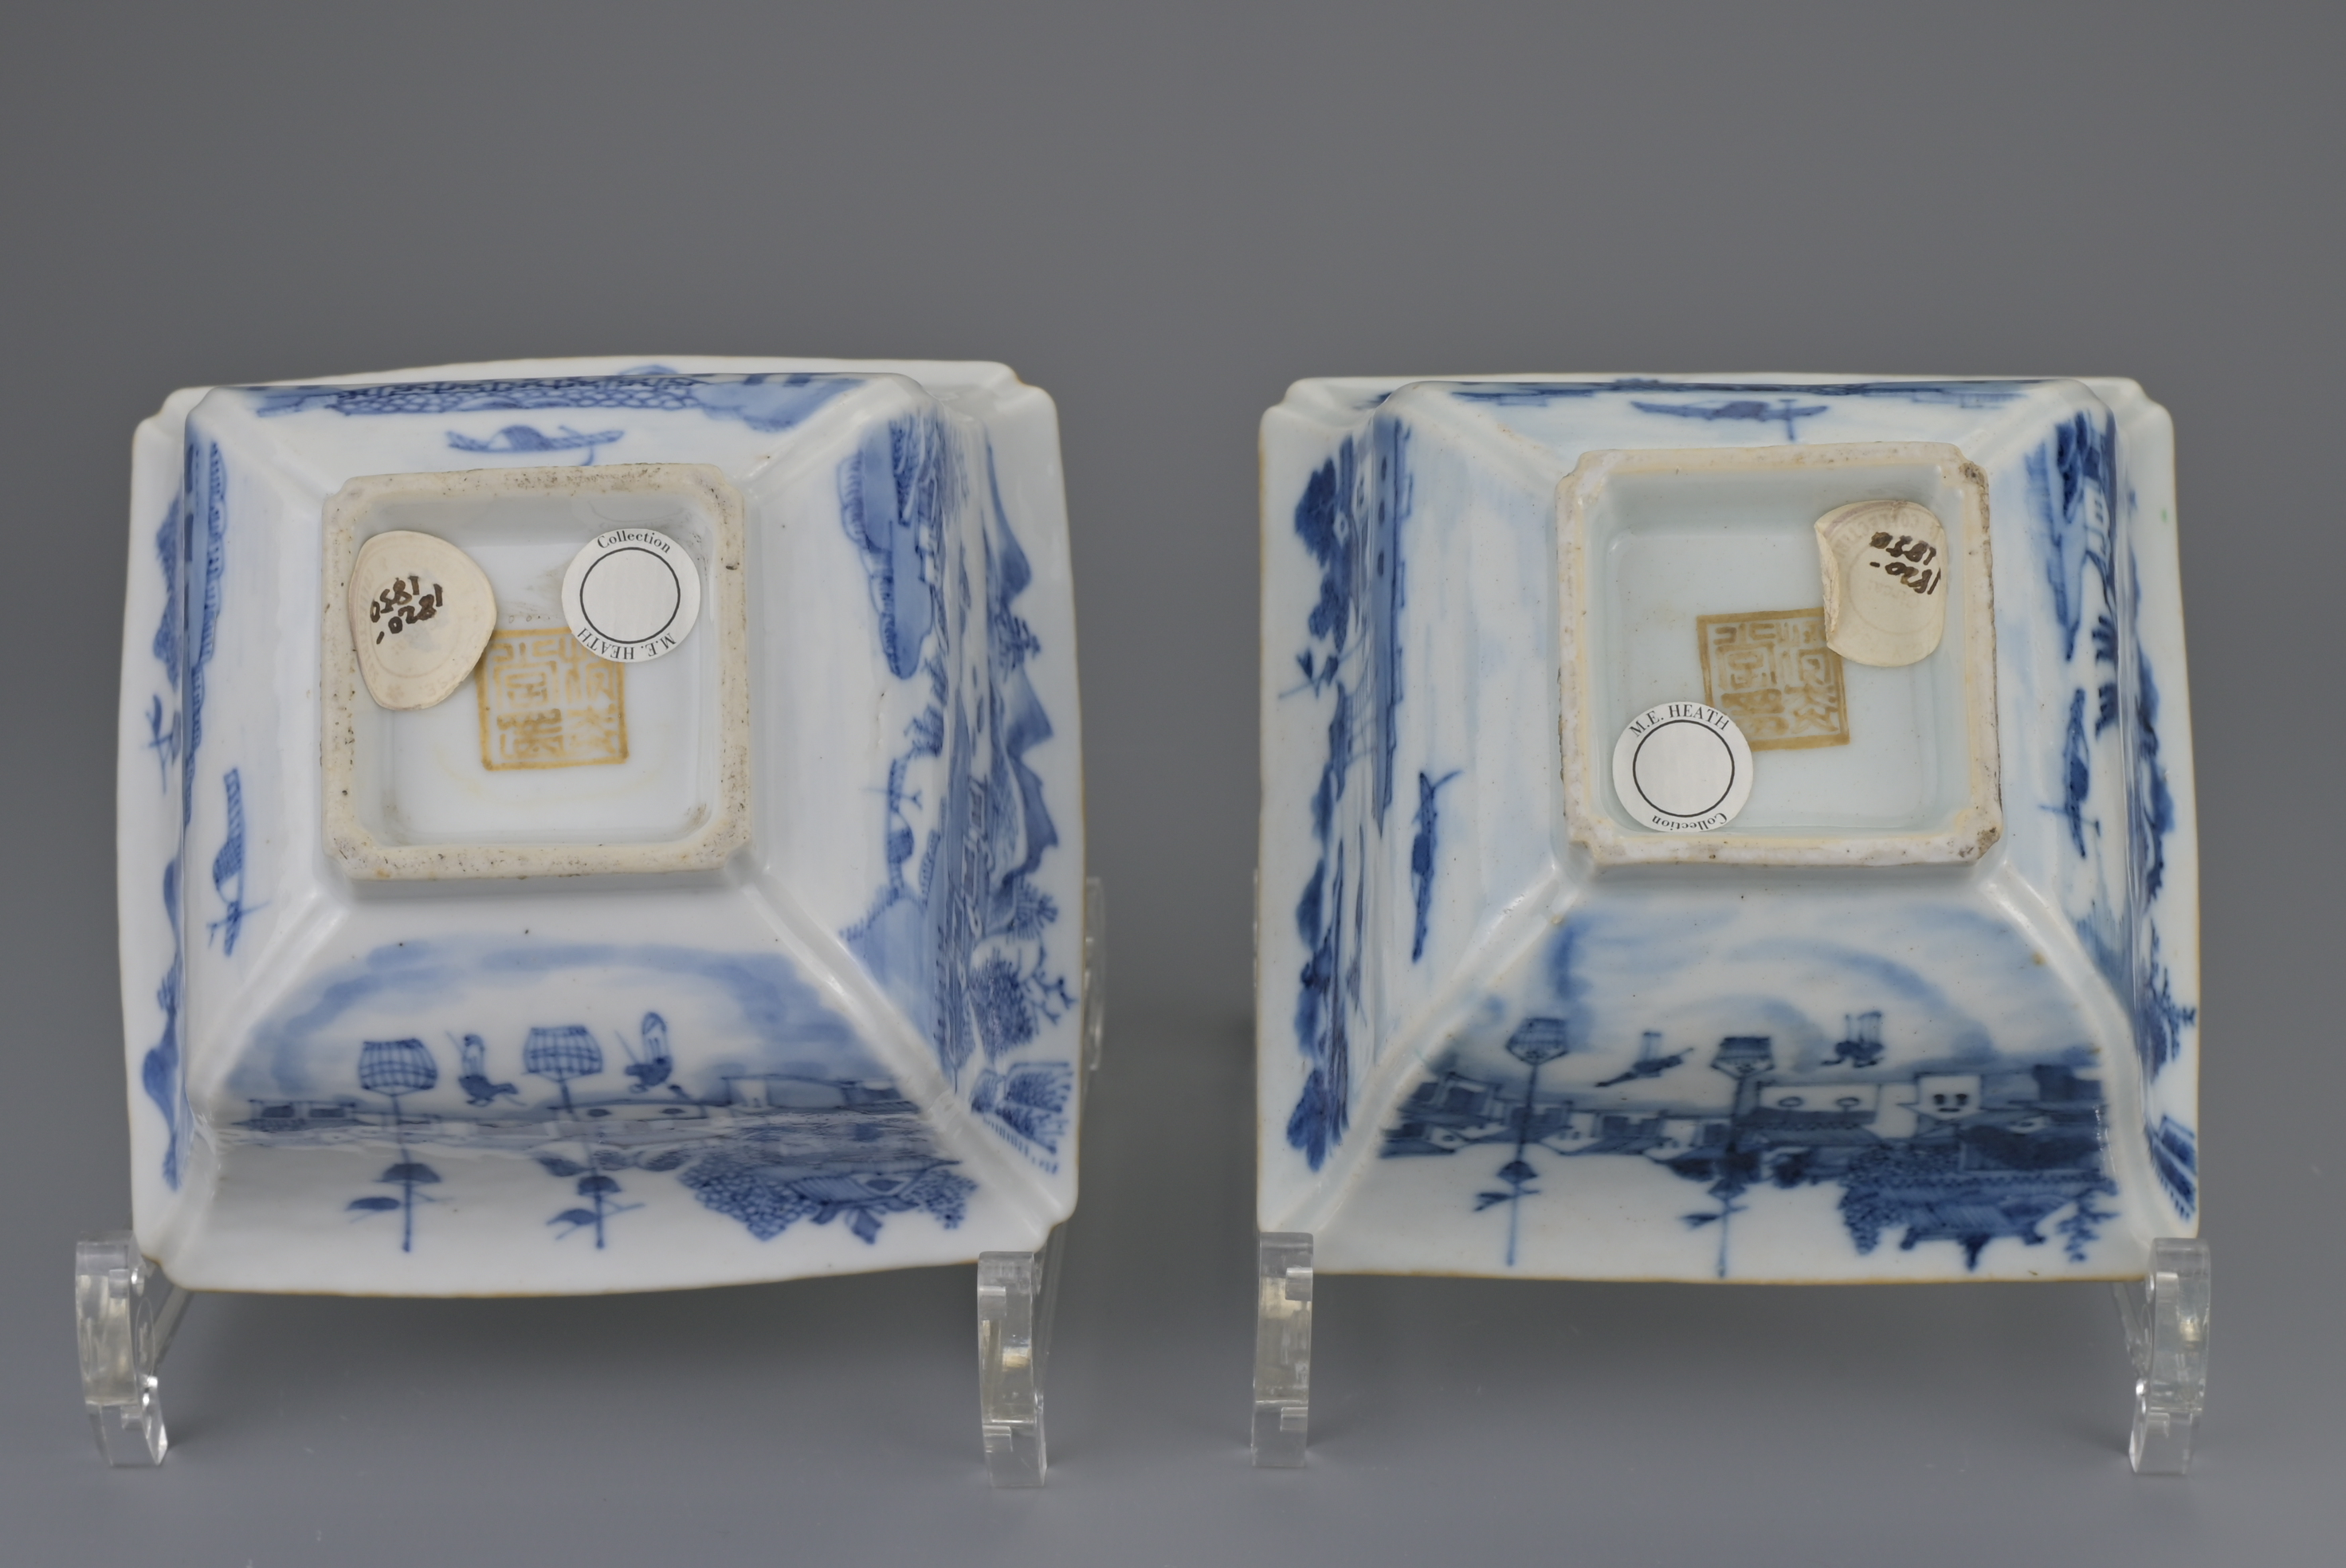 PAIR OF CHINESE BLUE AND WHITE PORCELAIN BOWLS, DAOGUANG MARK AND PERIOD, 19th CENTURY - Image 6 of 9